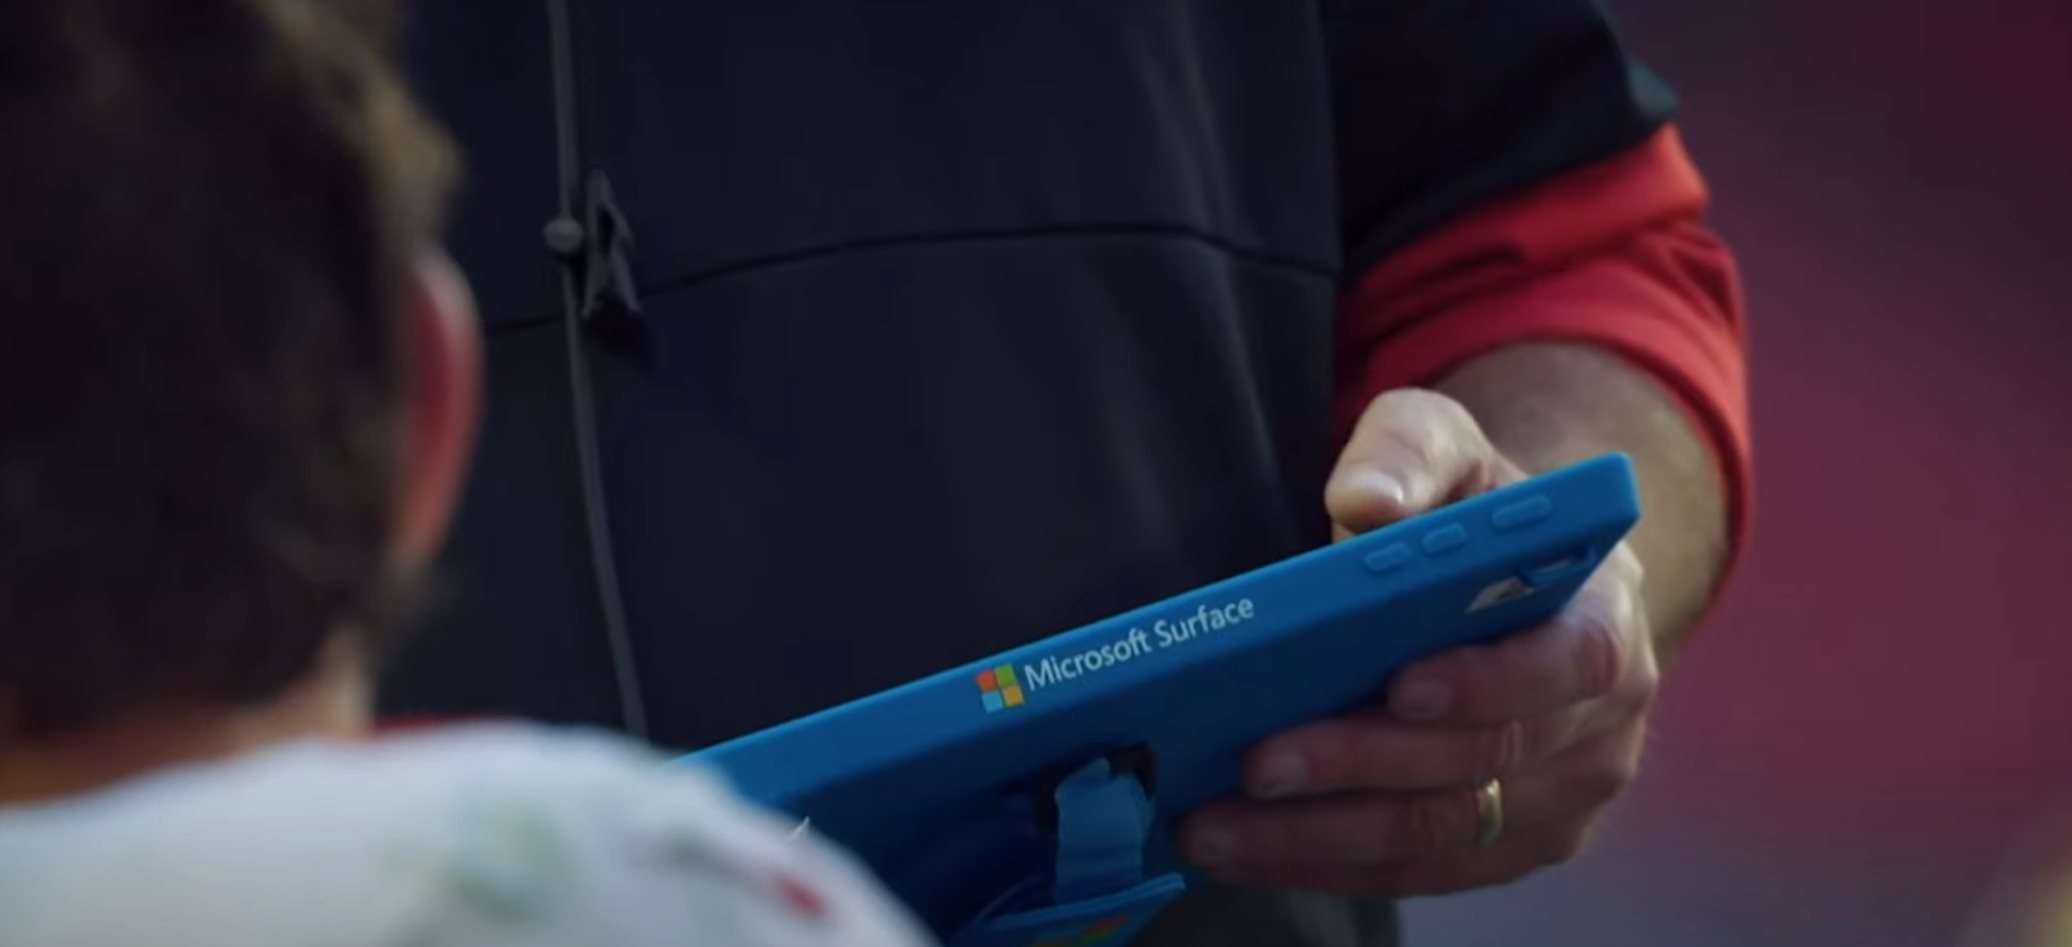 Microsoft releases surface ad to highlight nfl partnership